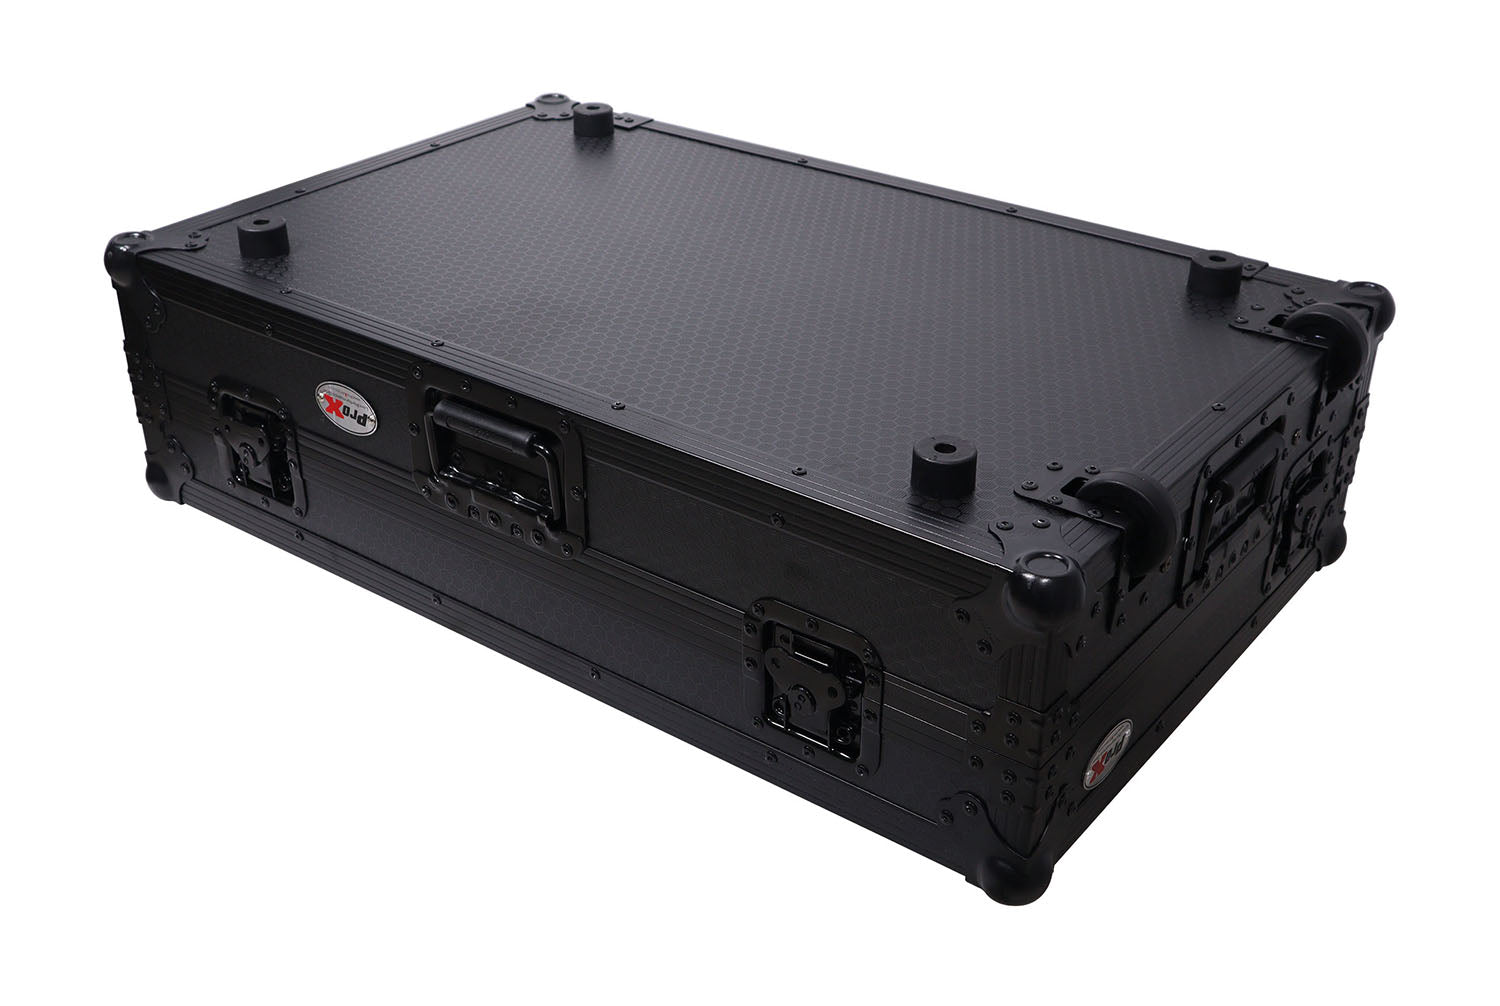 ProX XS-DDJFLX10WLTBLLED ATA Flight Style Road Case For Pioneer DDJ-FLX10 DJ Controller with Laptop Shelf 1U Rack Space Wheels and LED - Black - Hollywood DJ